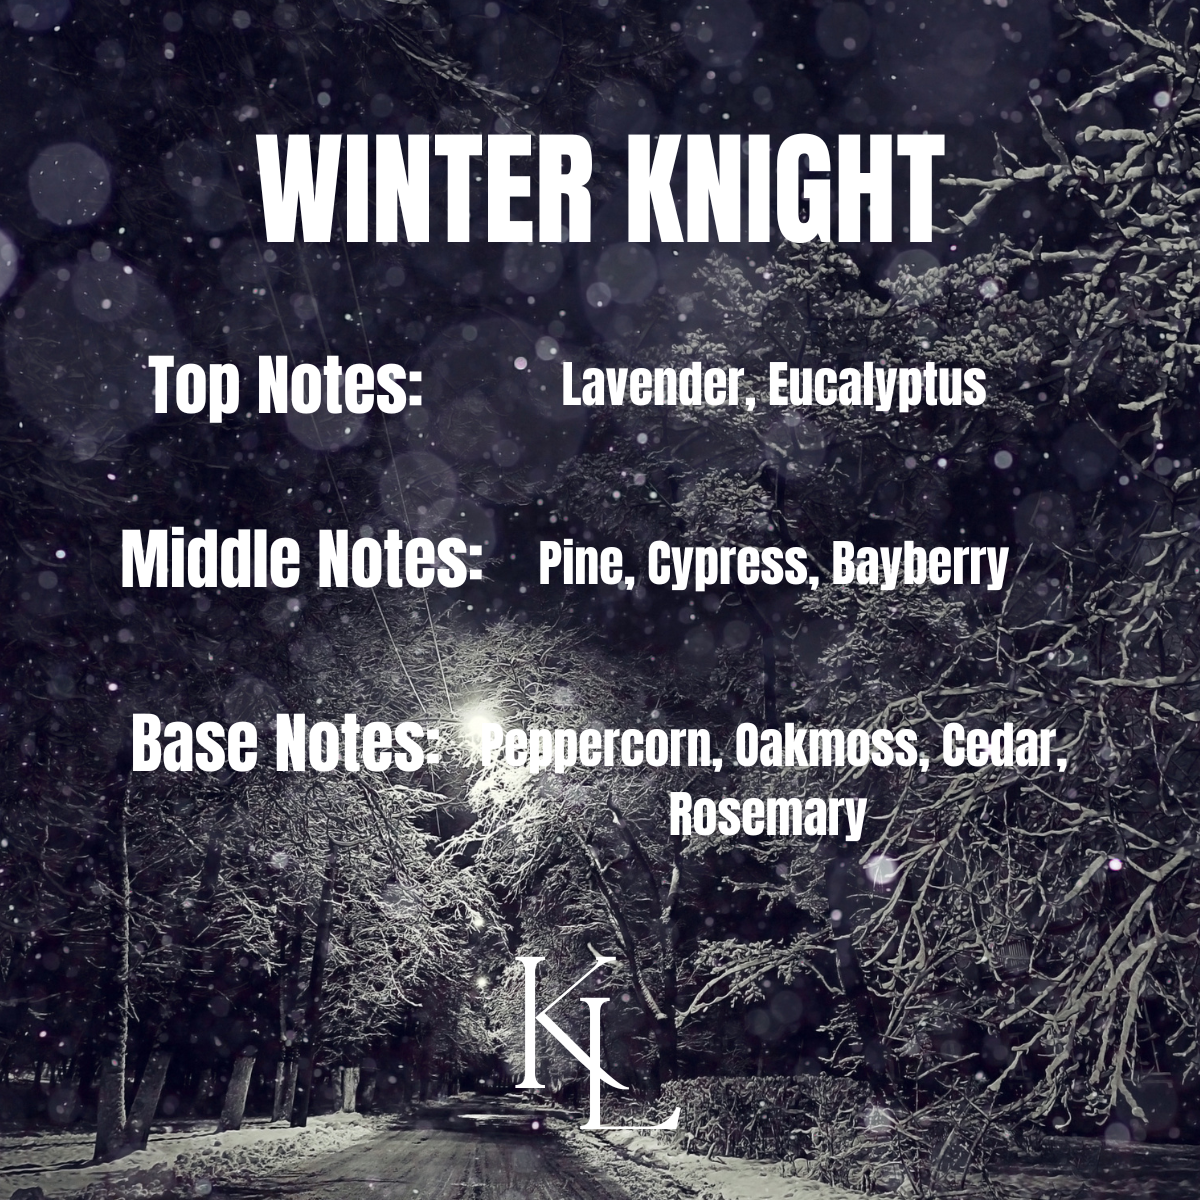 Winter Knight Candle- Pine & Cypress Scented Candle |Best Winter Scented Candle | Non-Toxic & Eco-Friendly | Wood Wick